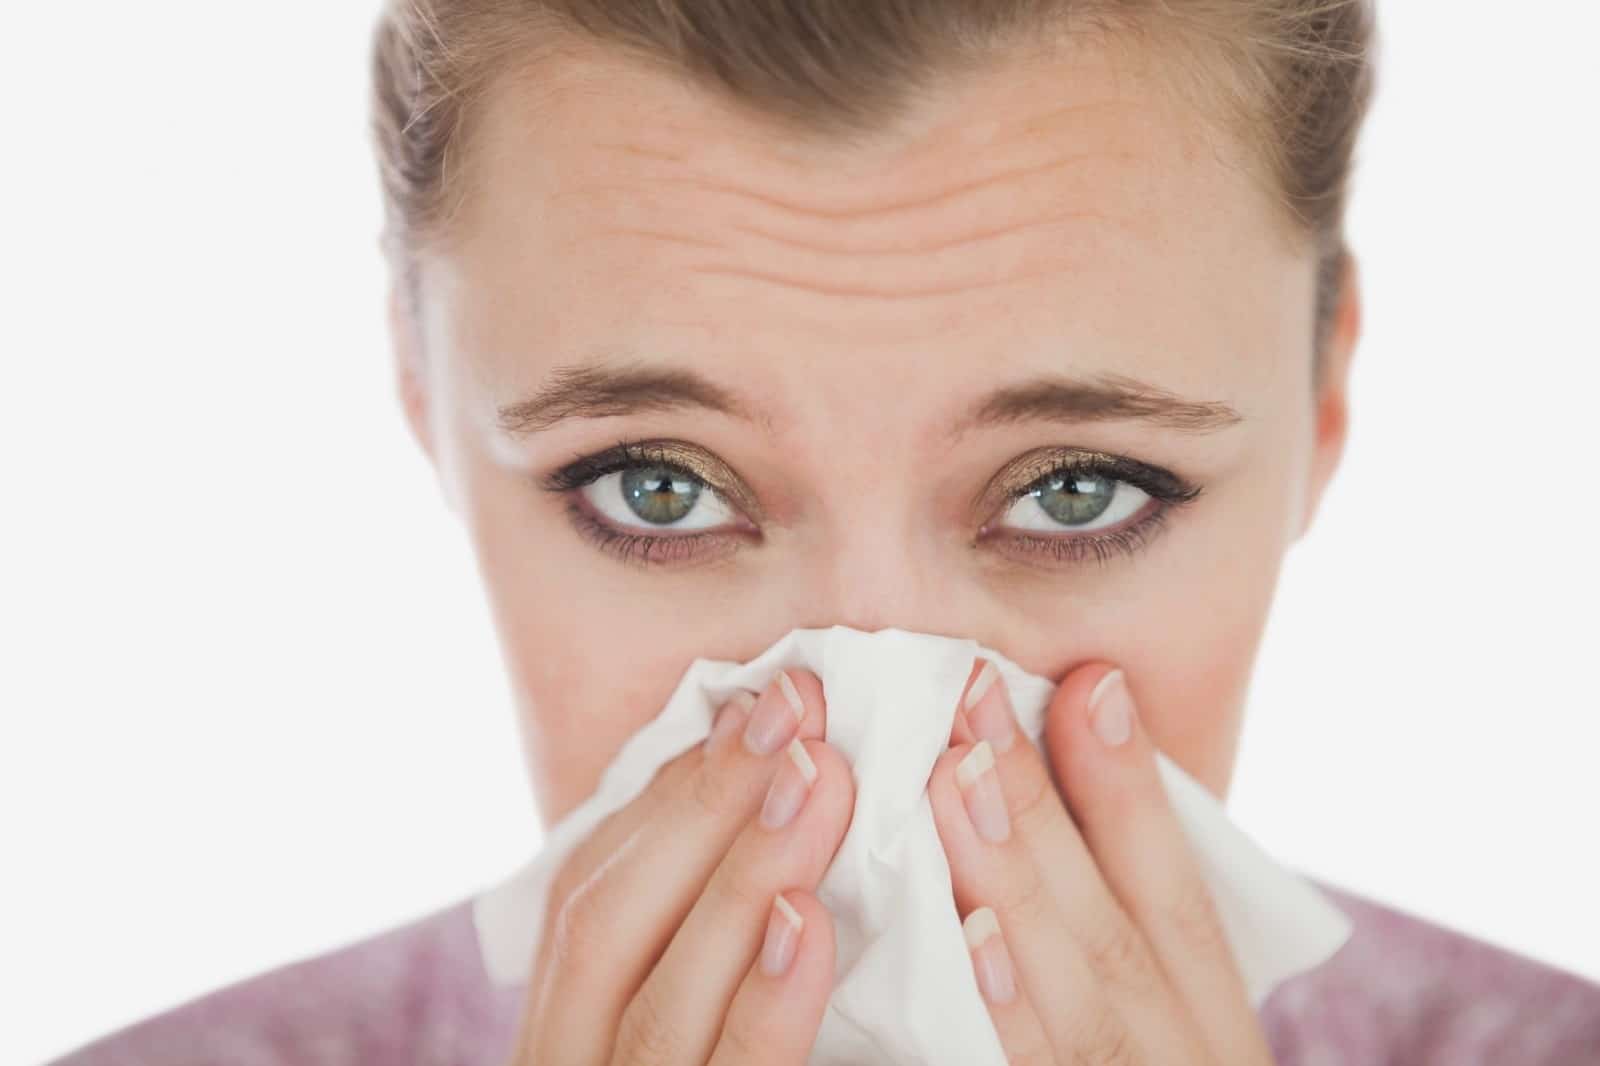 Factors that increase the risk of colds